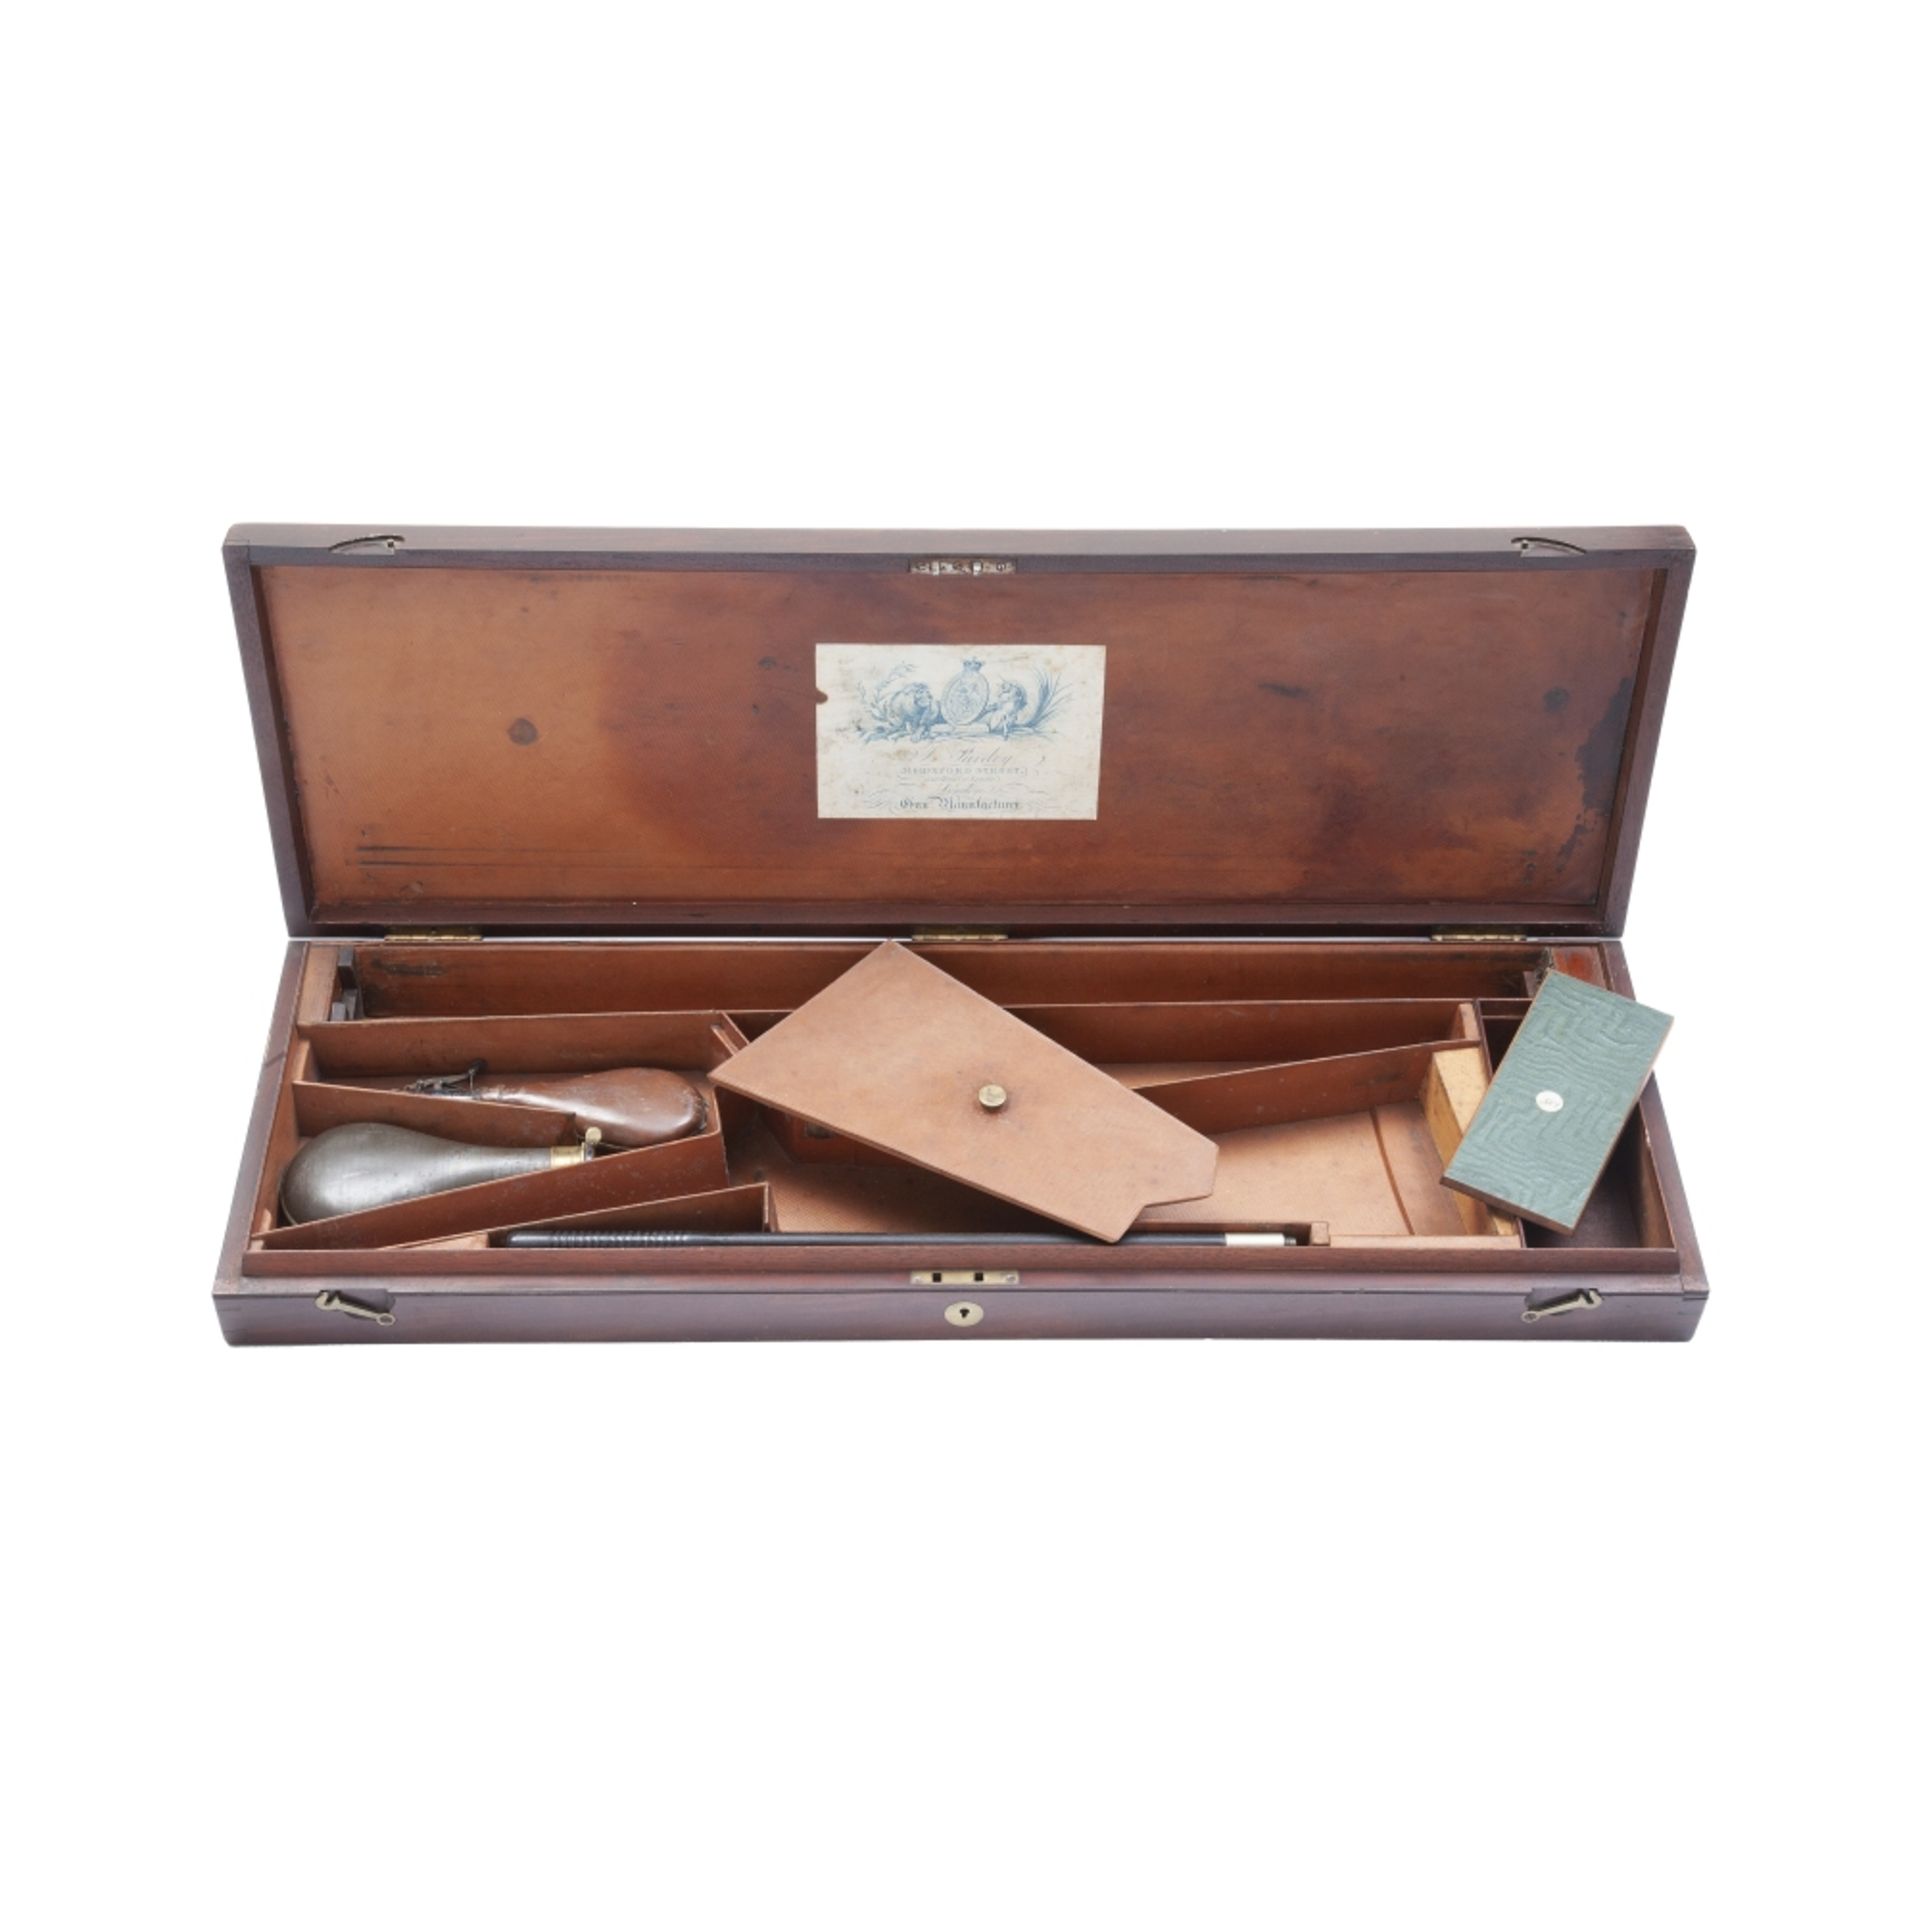 A Mahogany Case For An 11-Bore Percussion D.B. Sporting Gun And Accessories